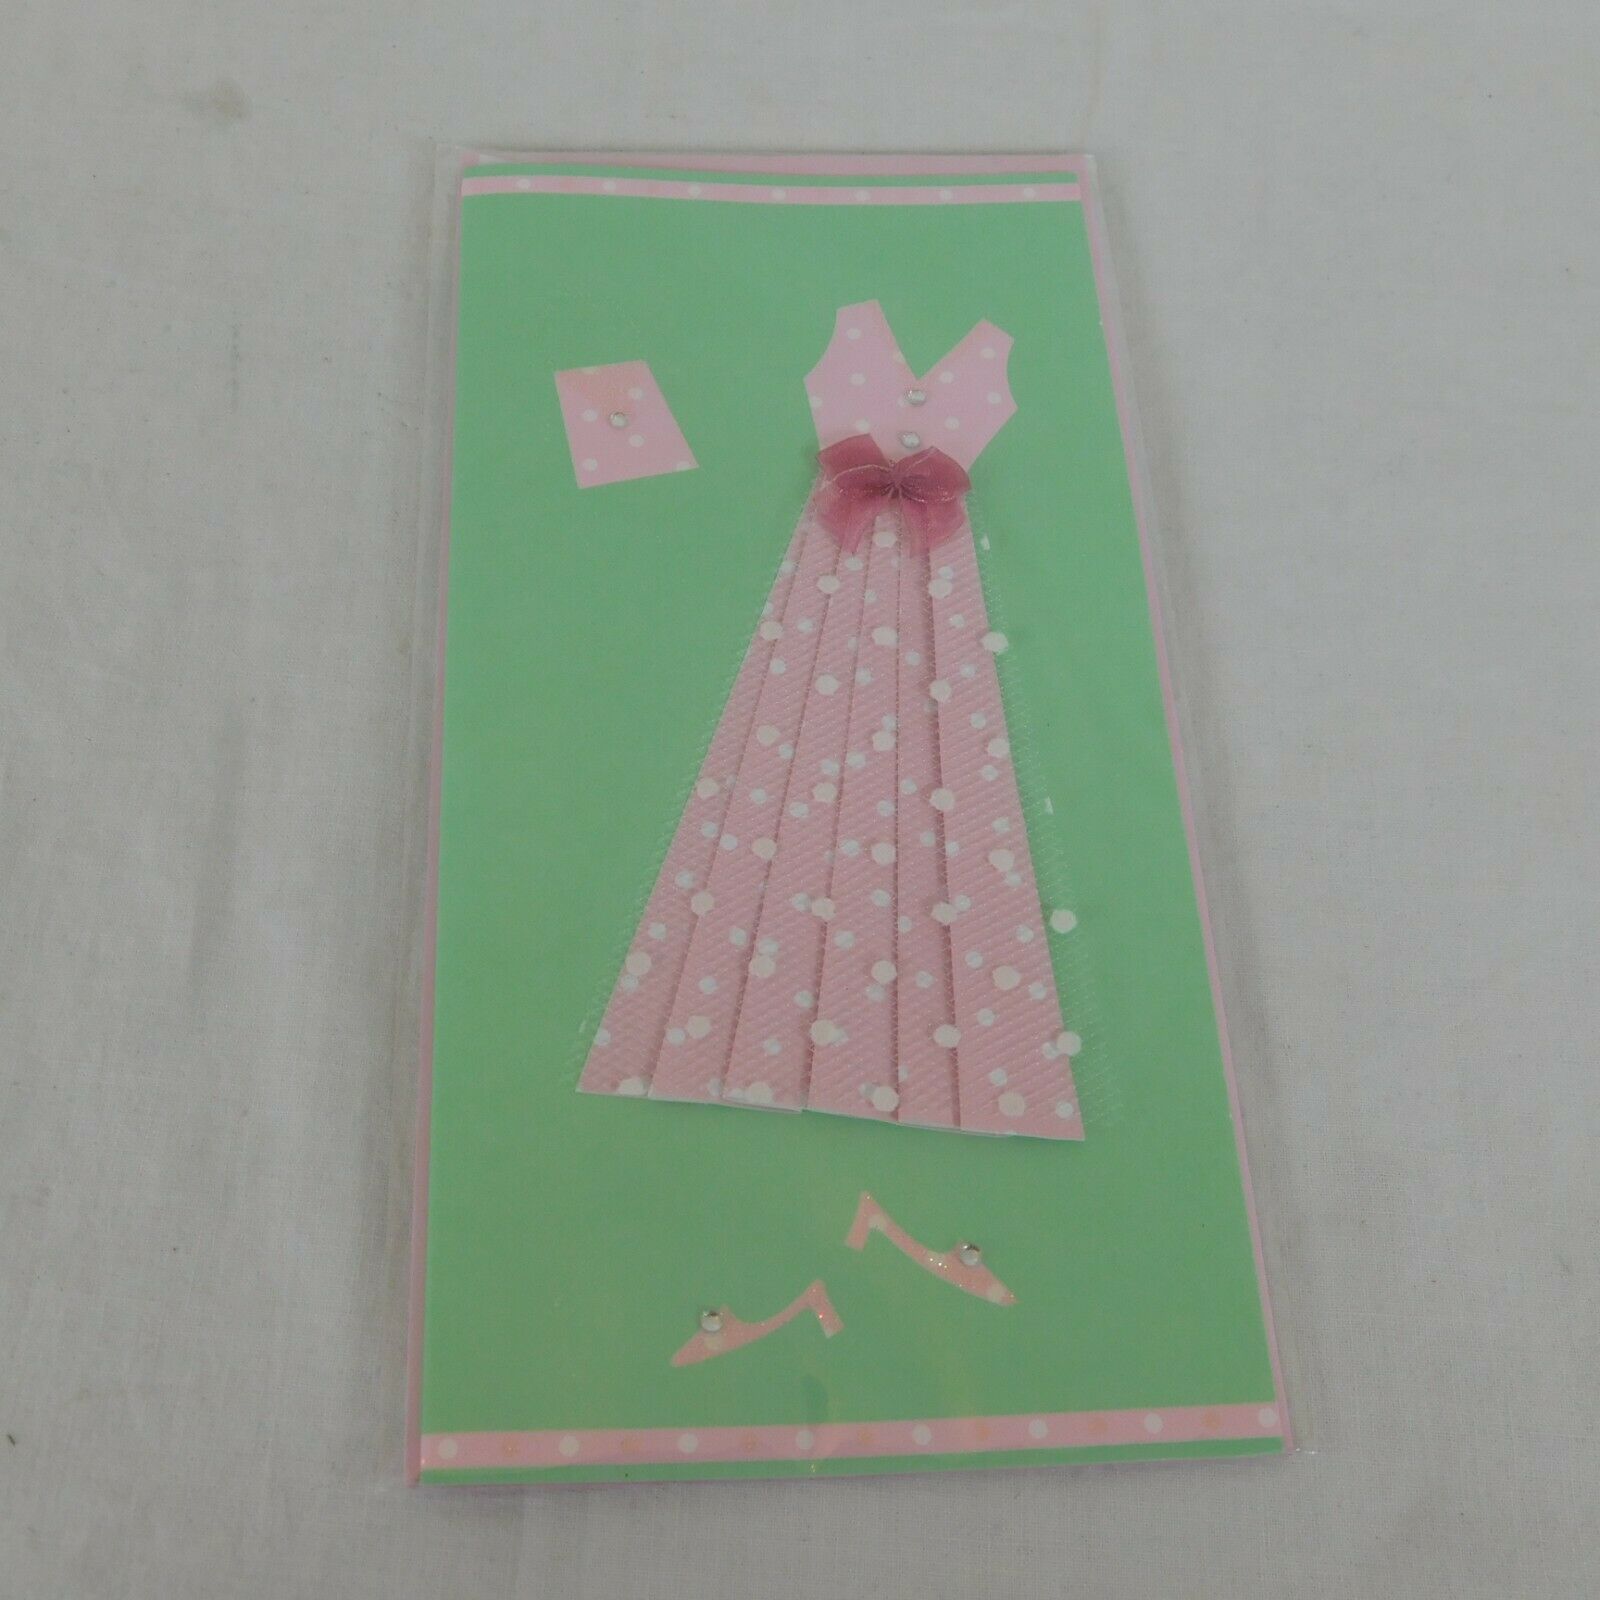 Paper Magic Group Blank Greeting Note Card Pink Dress Shoes Purse Bag Envelope - $4.00